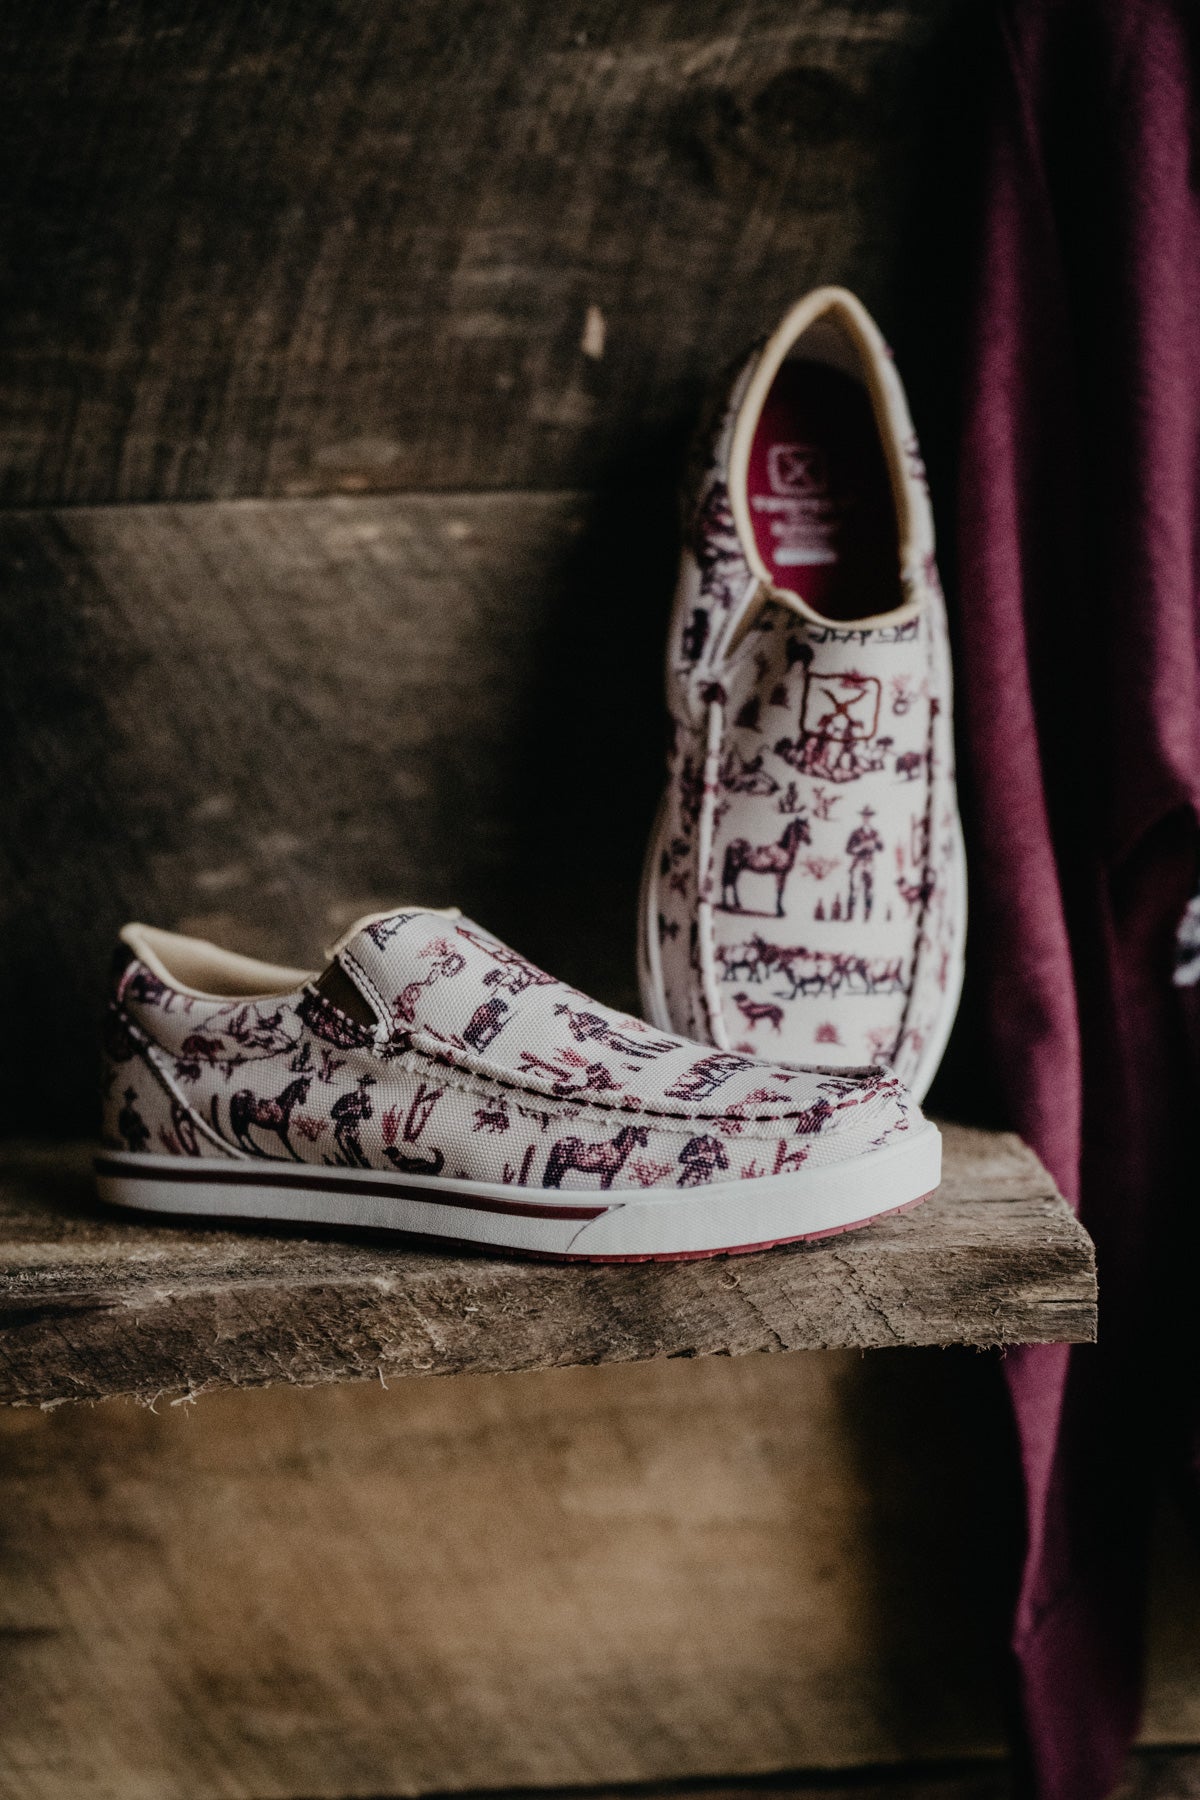 Maroon Western Printed Women's Slip-On Casual Shoe by Twisted X (1 Size 5.5 Only)